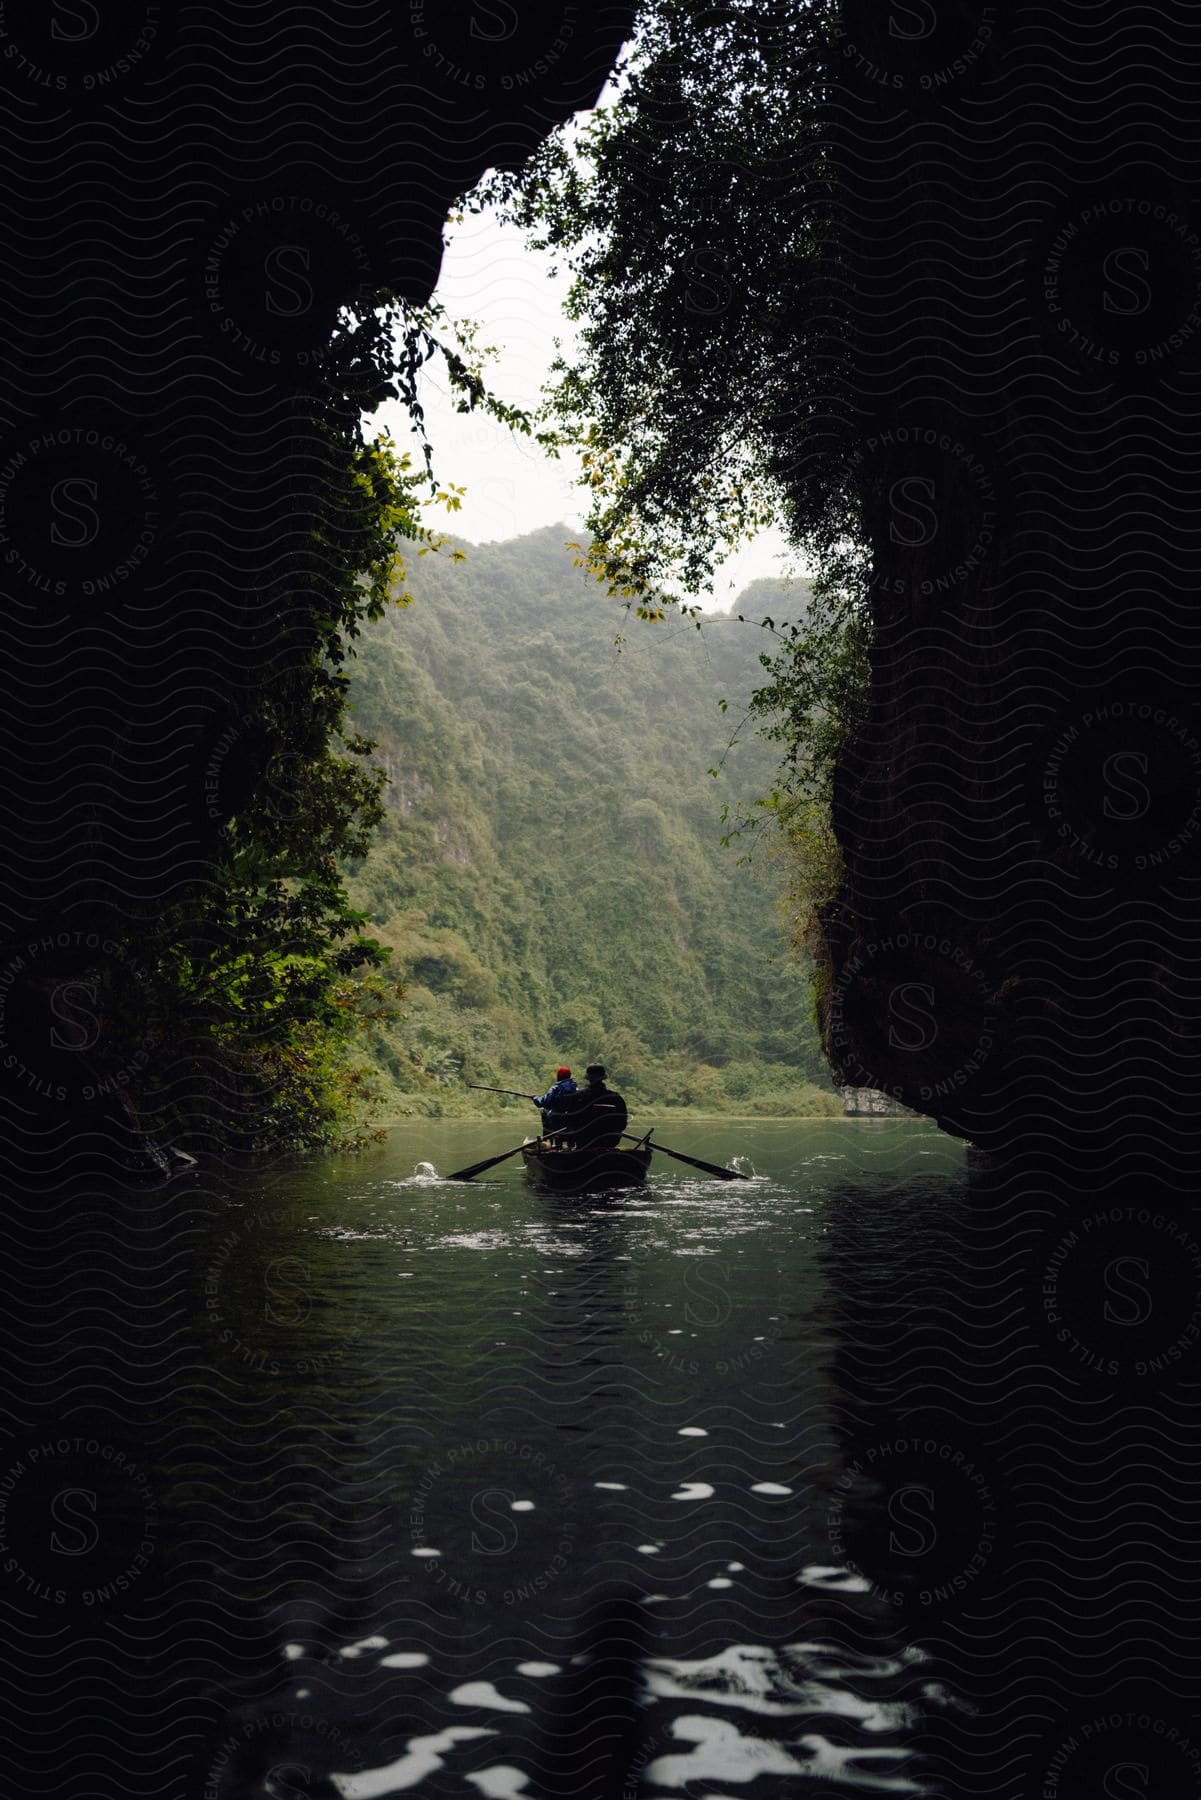 Two people paddle canoe through cave near mountain.